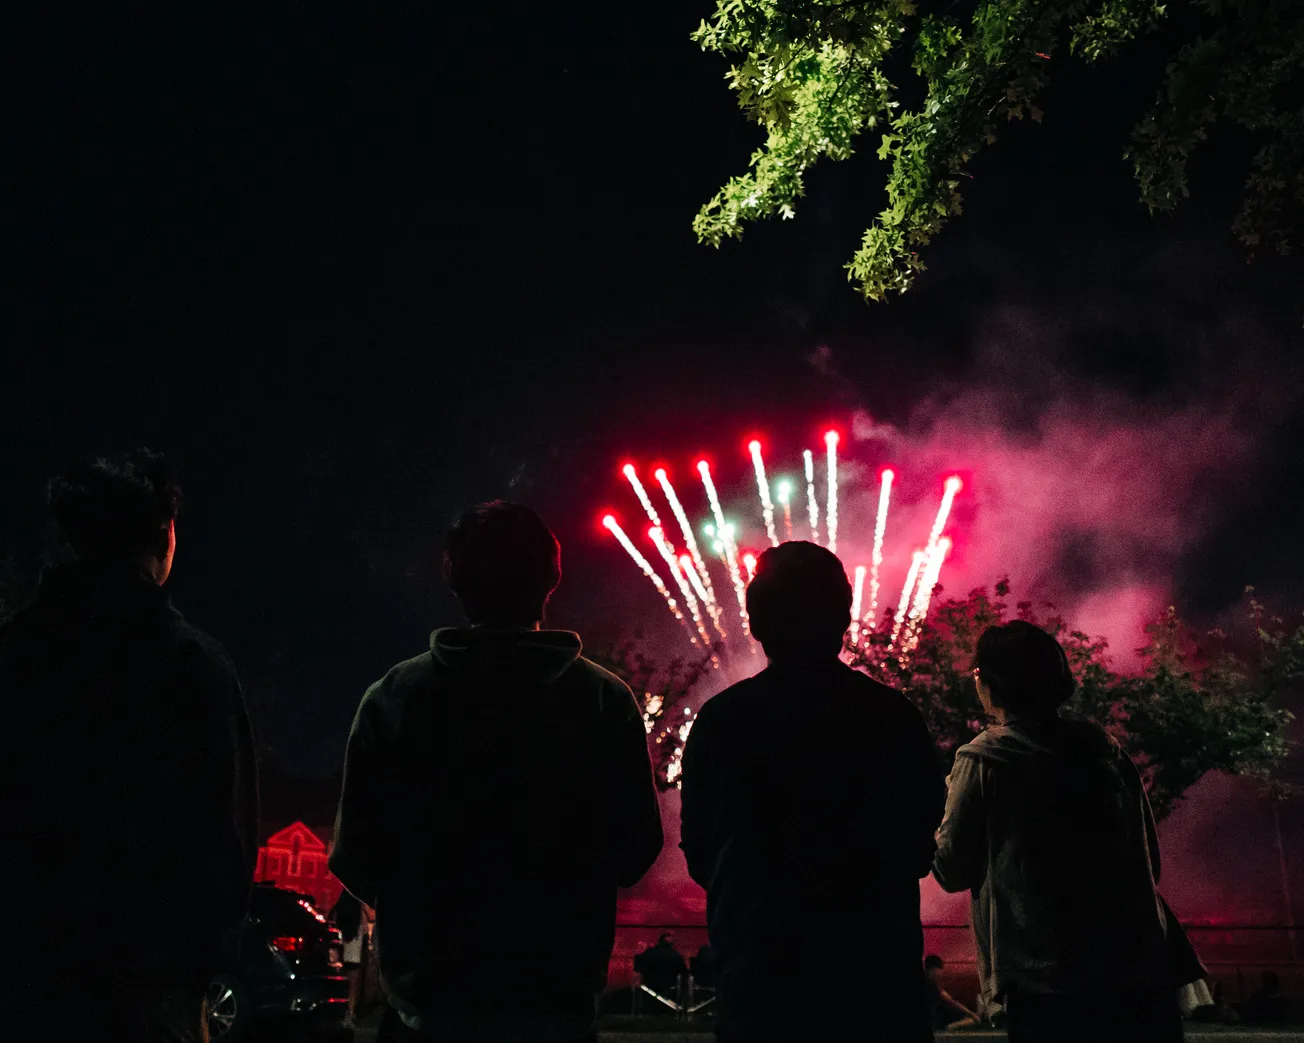 Looking for fireworks? Here’s where to see them!